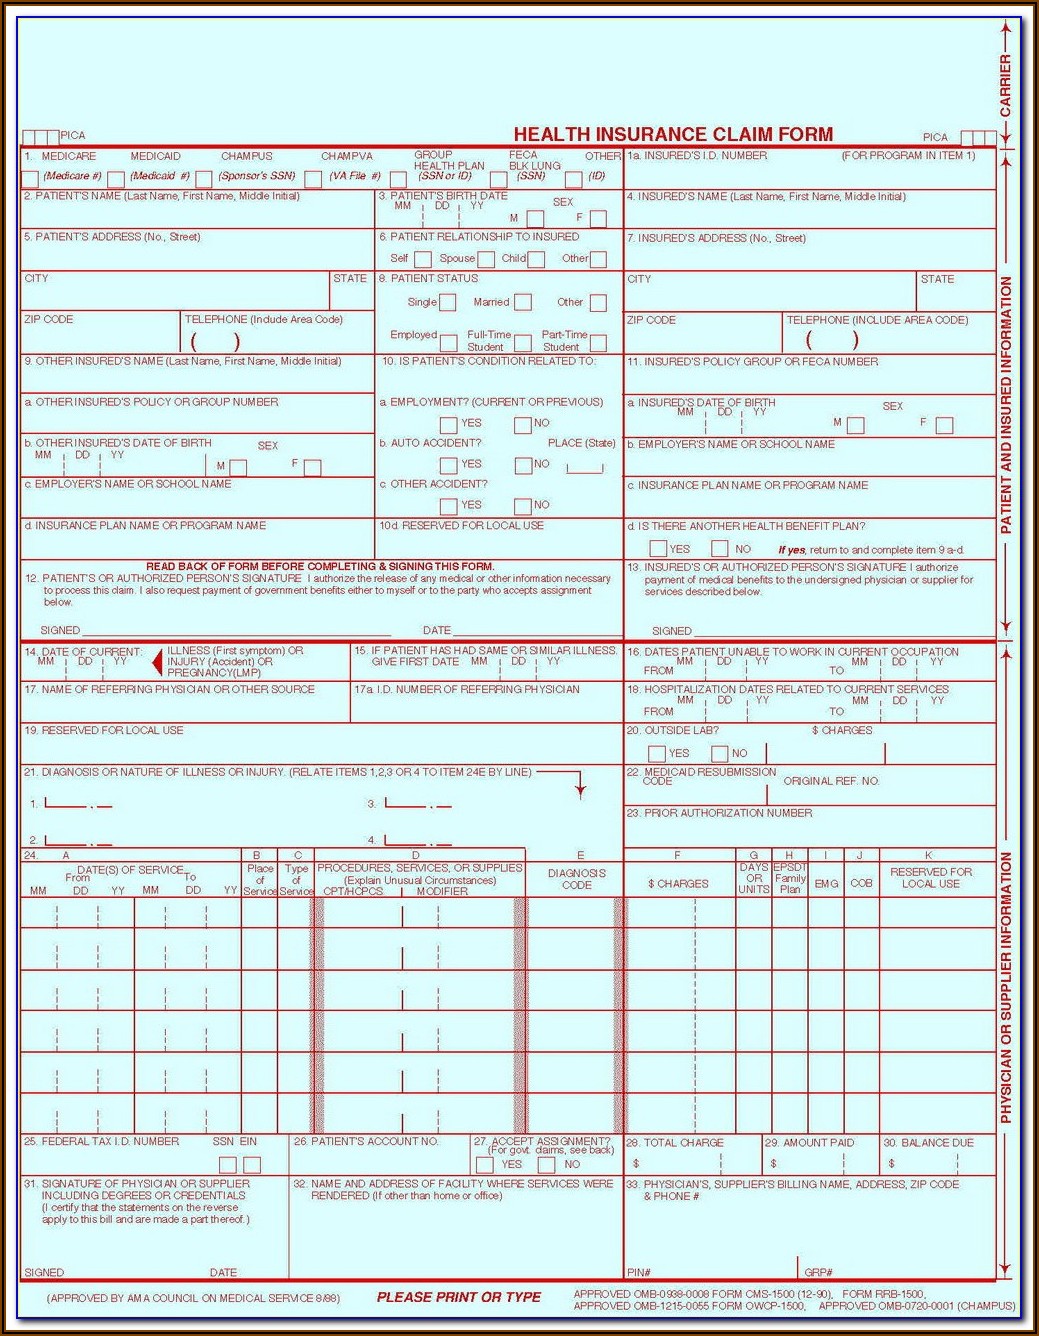 Medicare 1500 Form Example